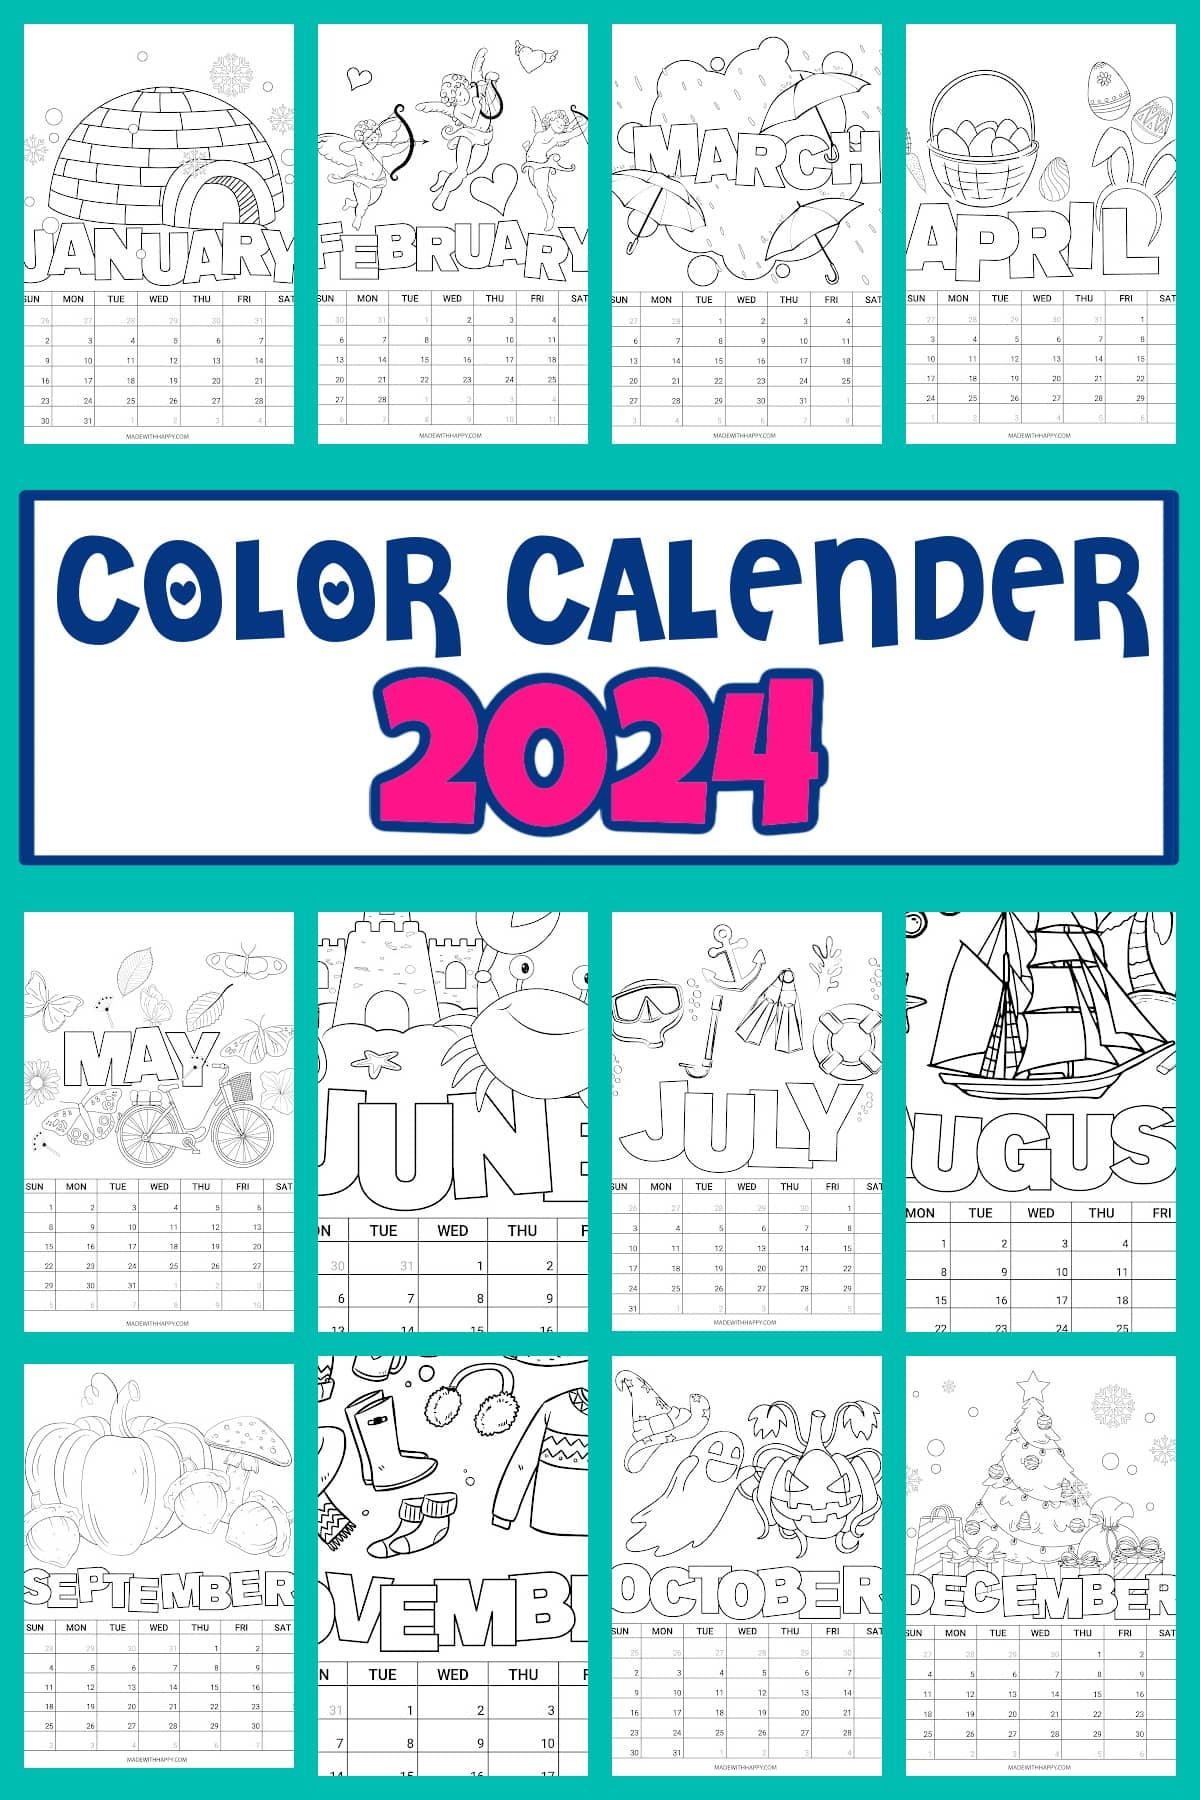 2024 Printable Coloring Calendar For Kids - Made With Happy for Free Printable Calendar 2024 For Kids